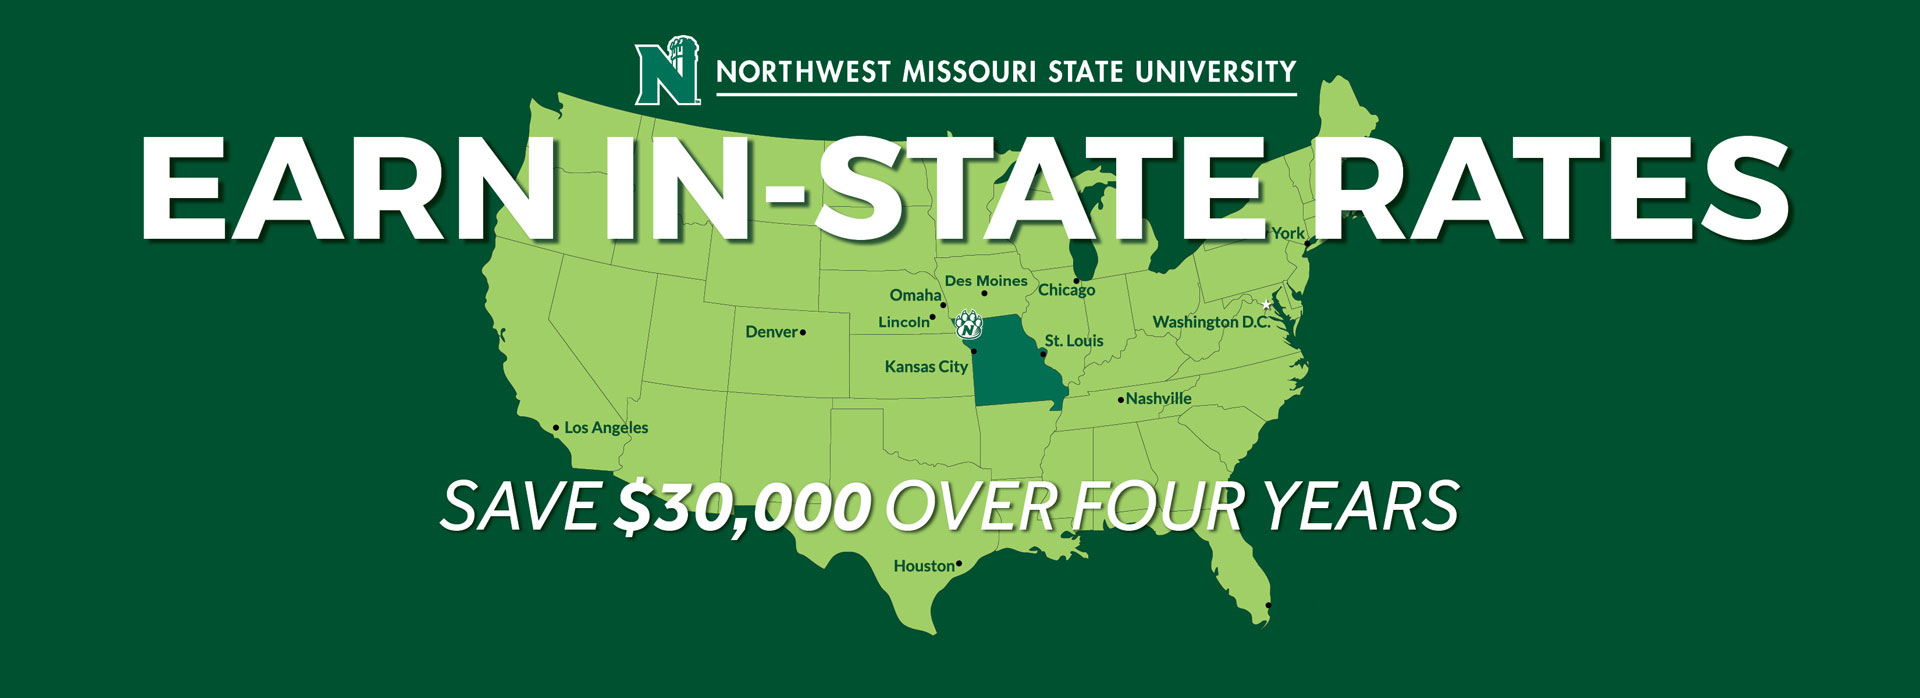 earn in-state tuition rates. This program can save new students more than $30,000 over 4 years